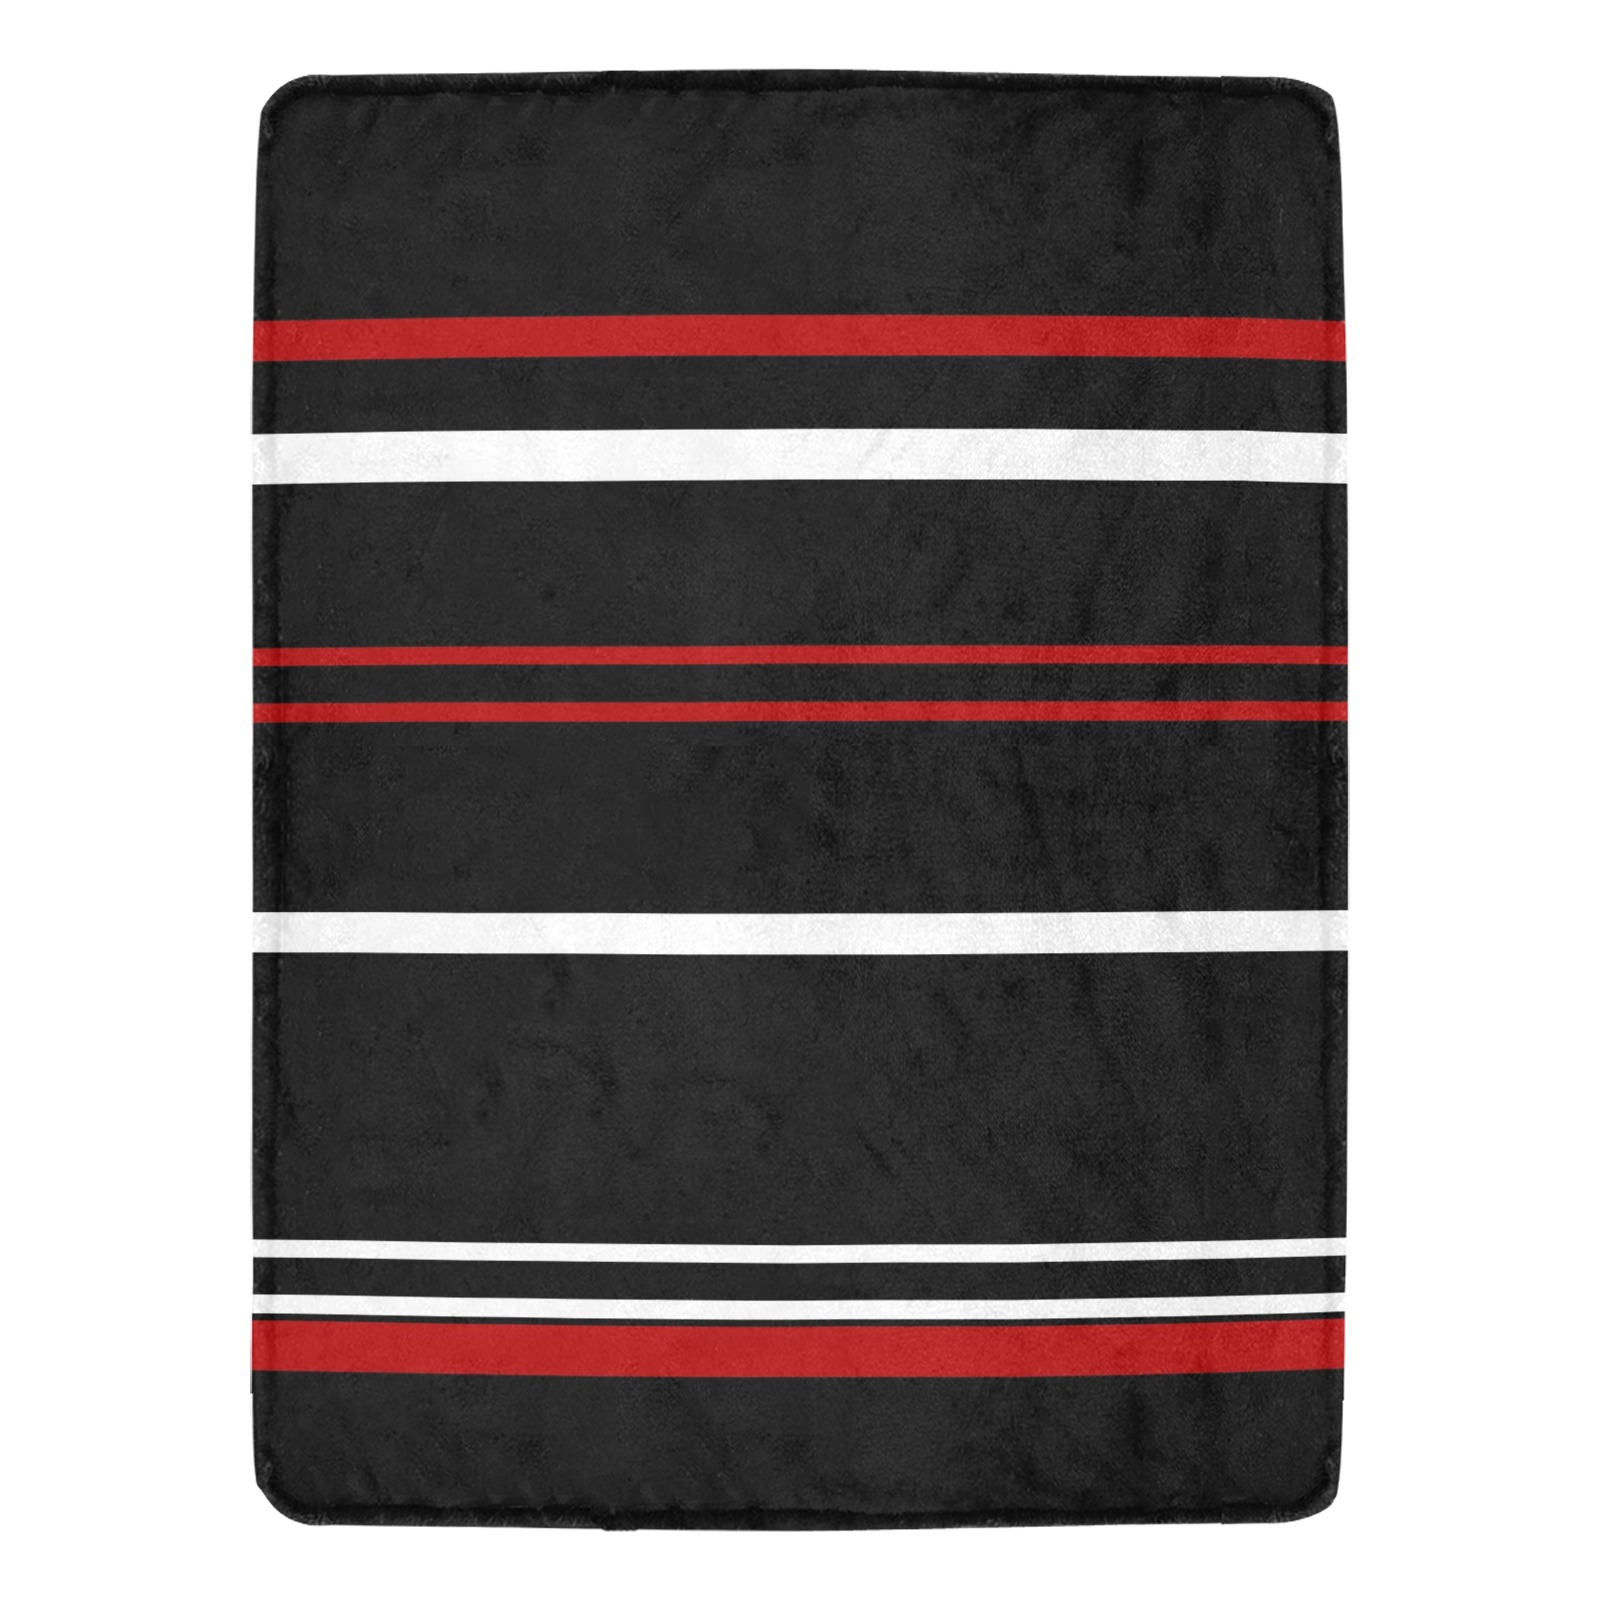 Black red and white stripes Ultra-Soft Micro Fleece Blanket 60"x80" (Thick)